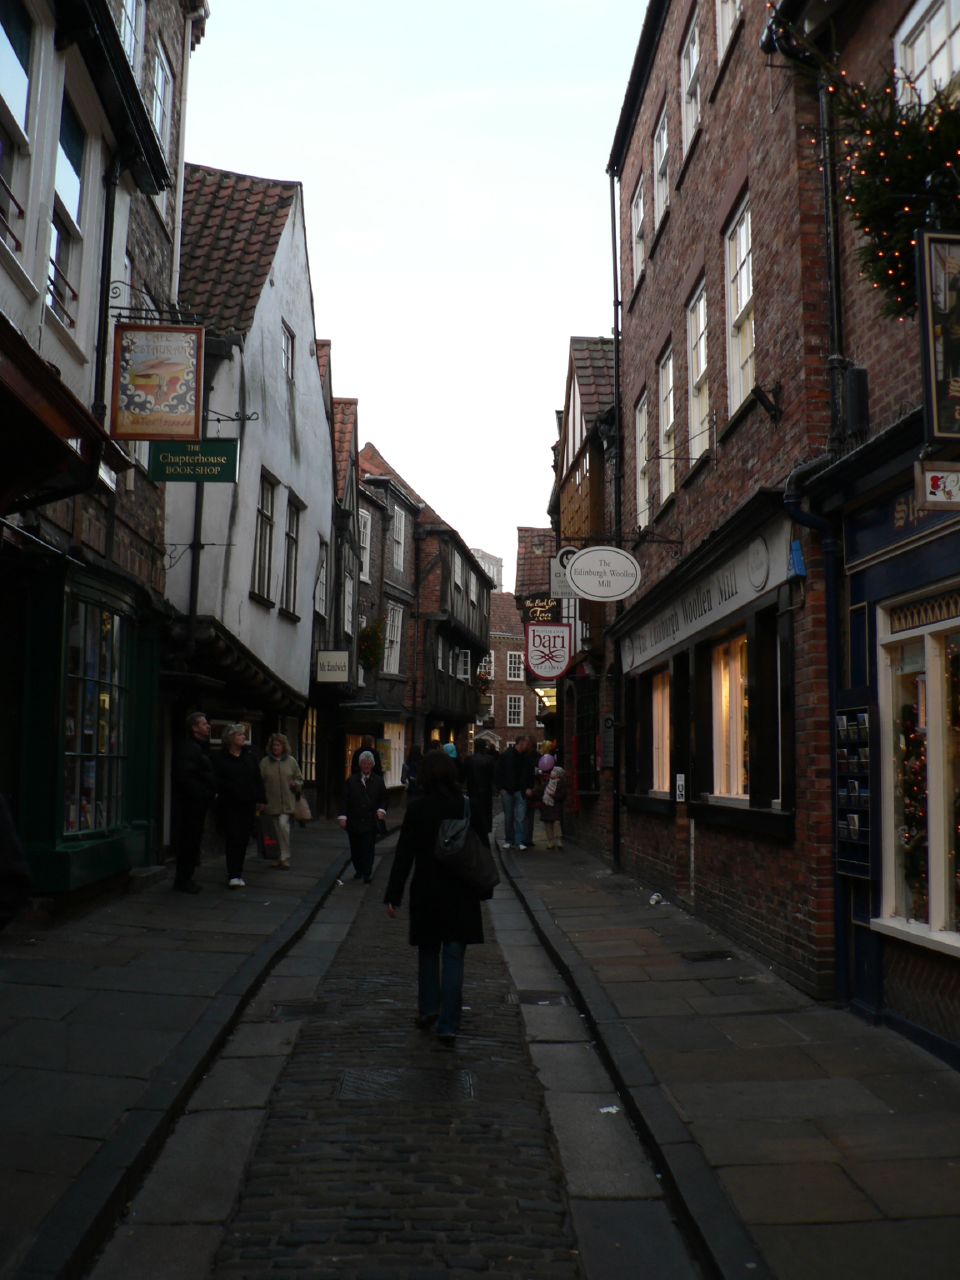 Shopping is one of the top reasons to visit York